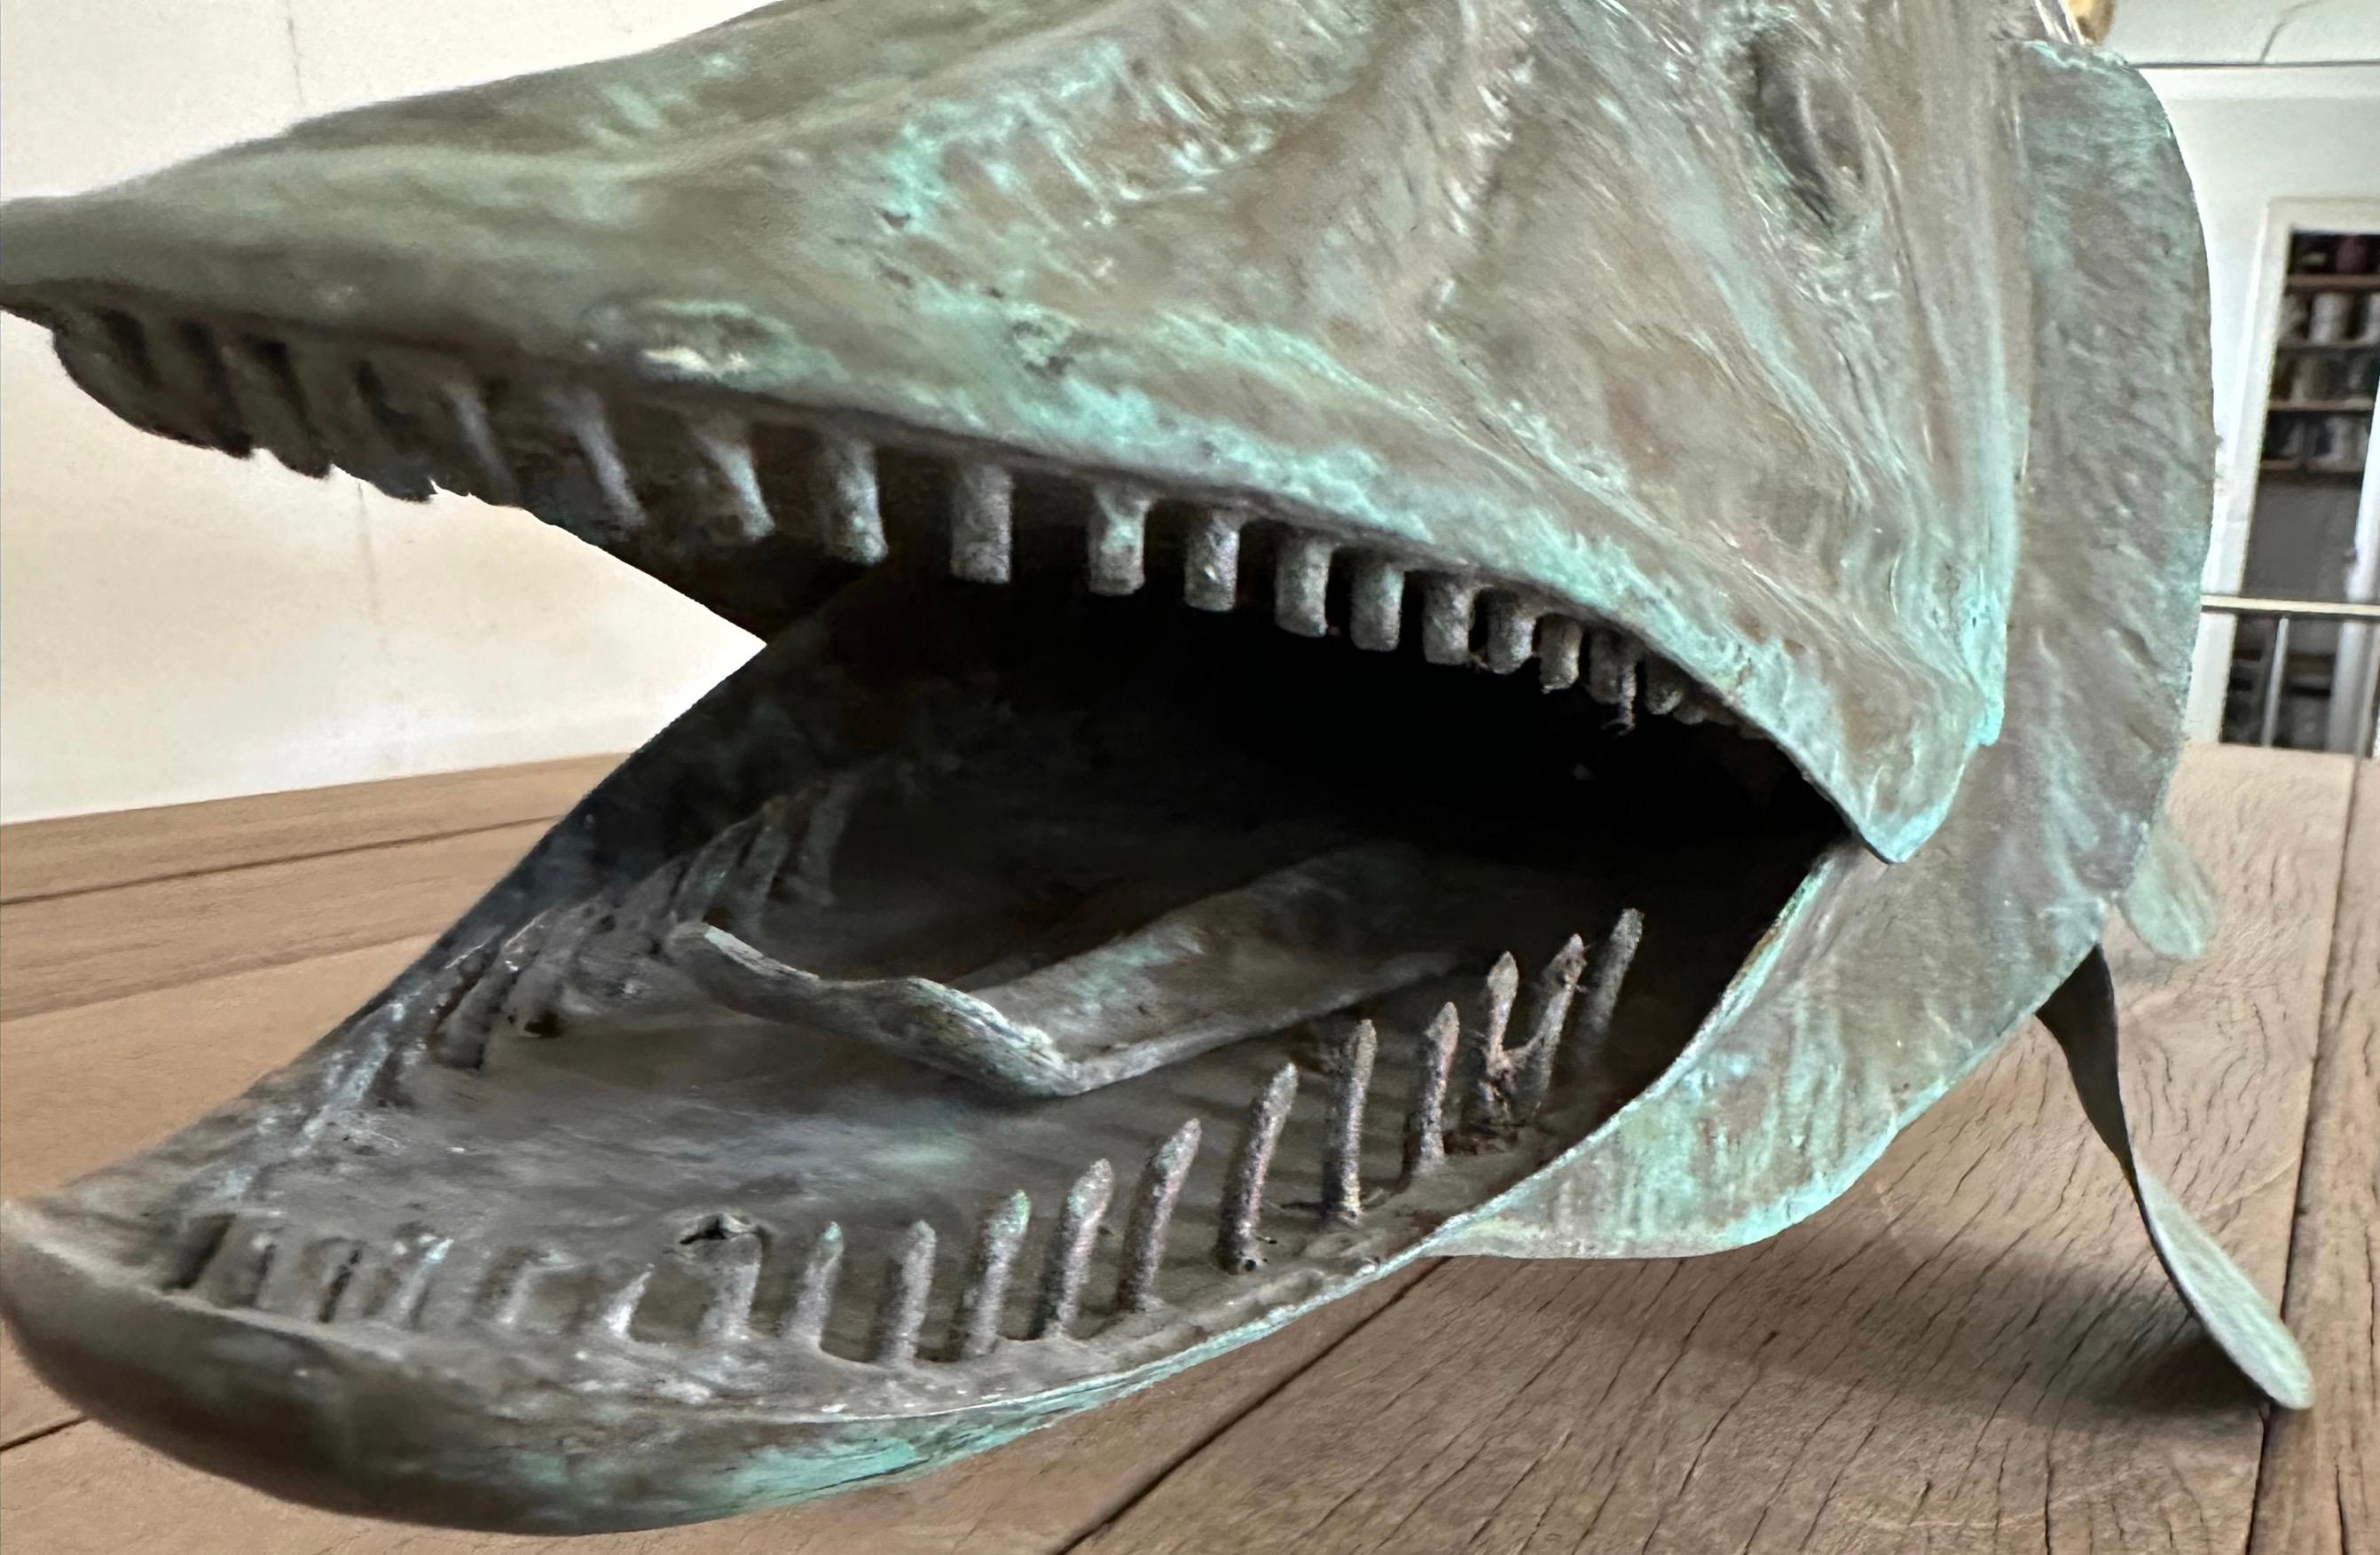 A fantastic 20th century copper barracuda was a part of a weather vane but now lacking the directional and the post but will make a wonderful sculpture with weathered verdigris patina and details.
The fish form weathervane made with hammered copper